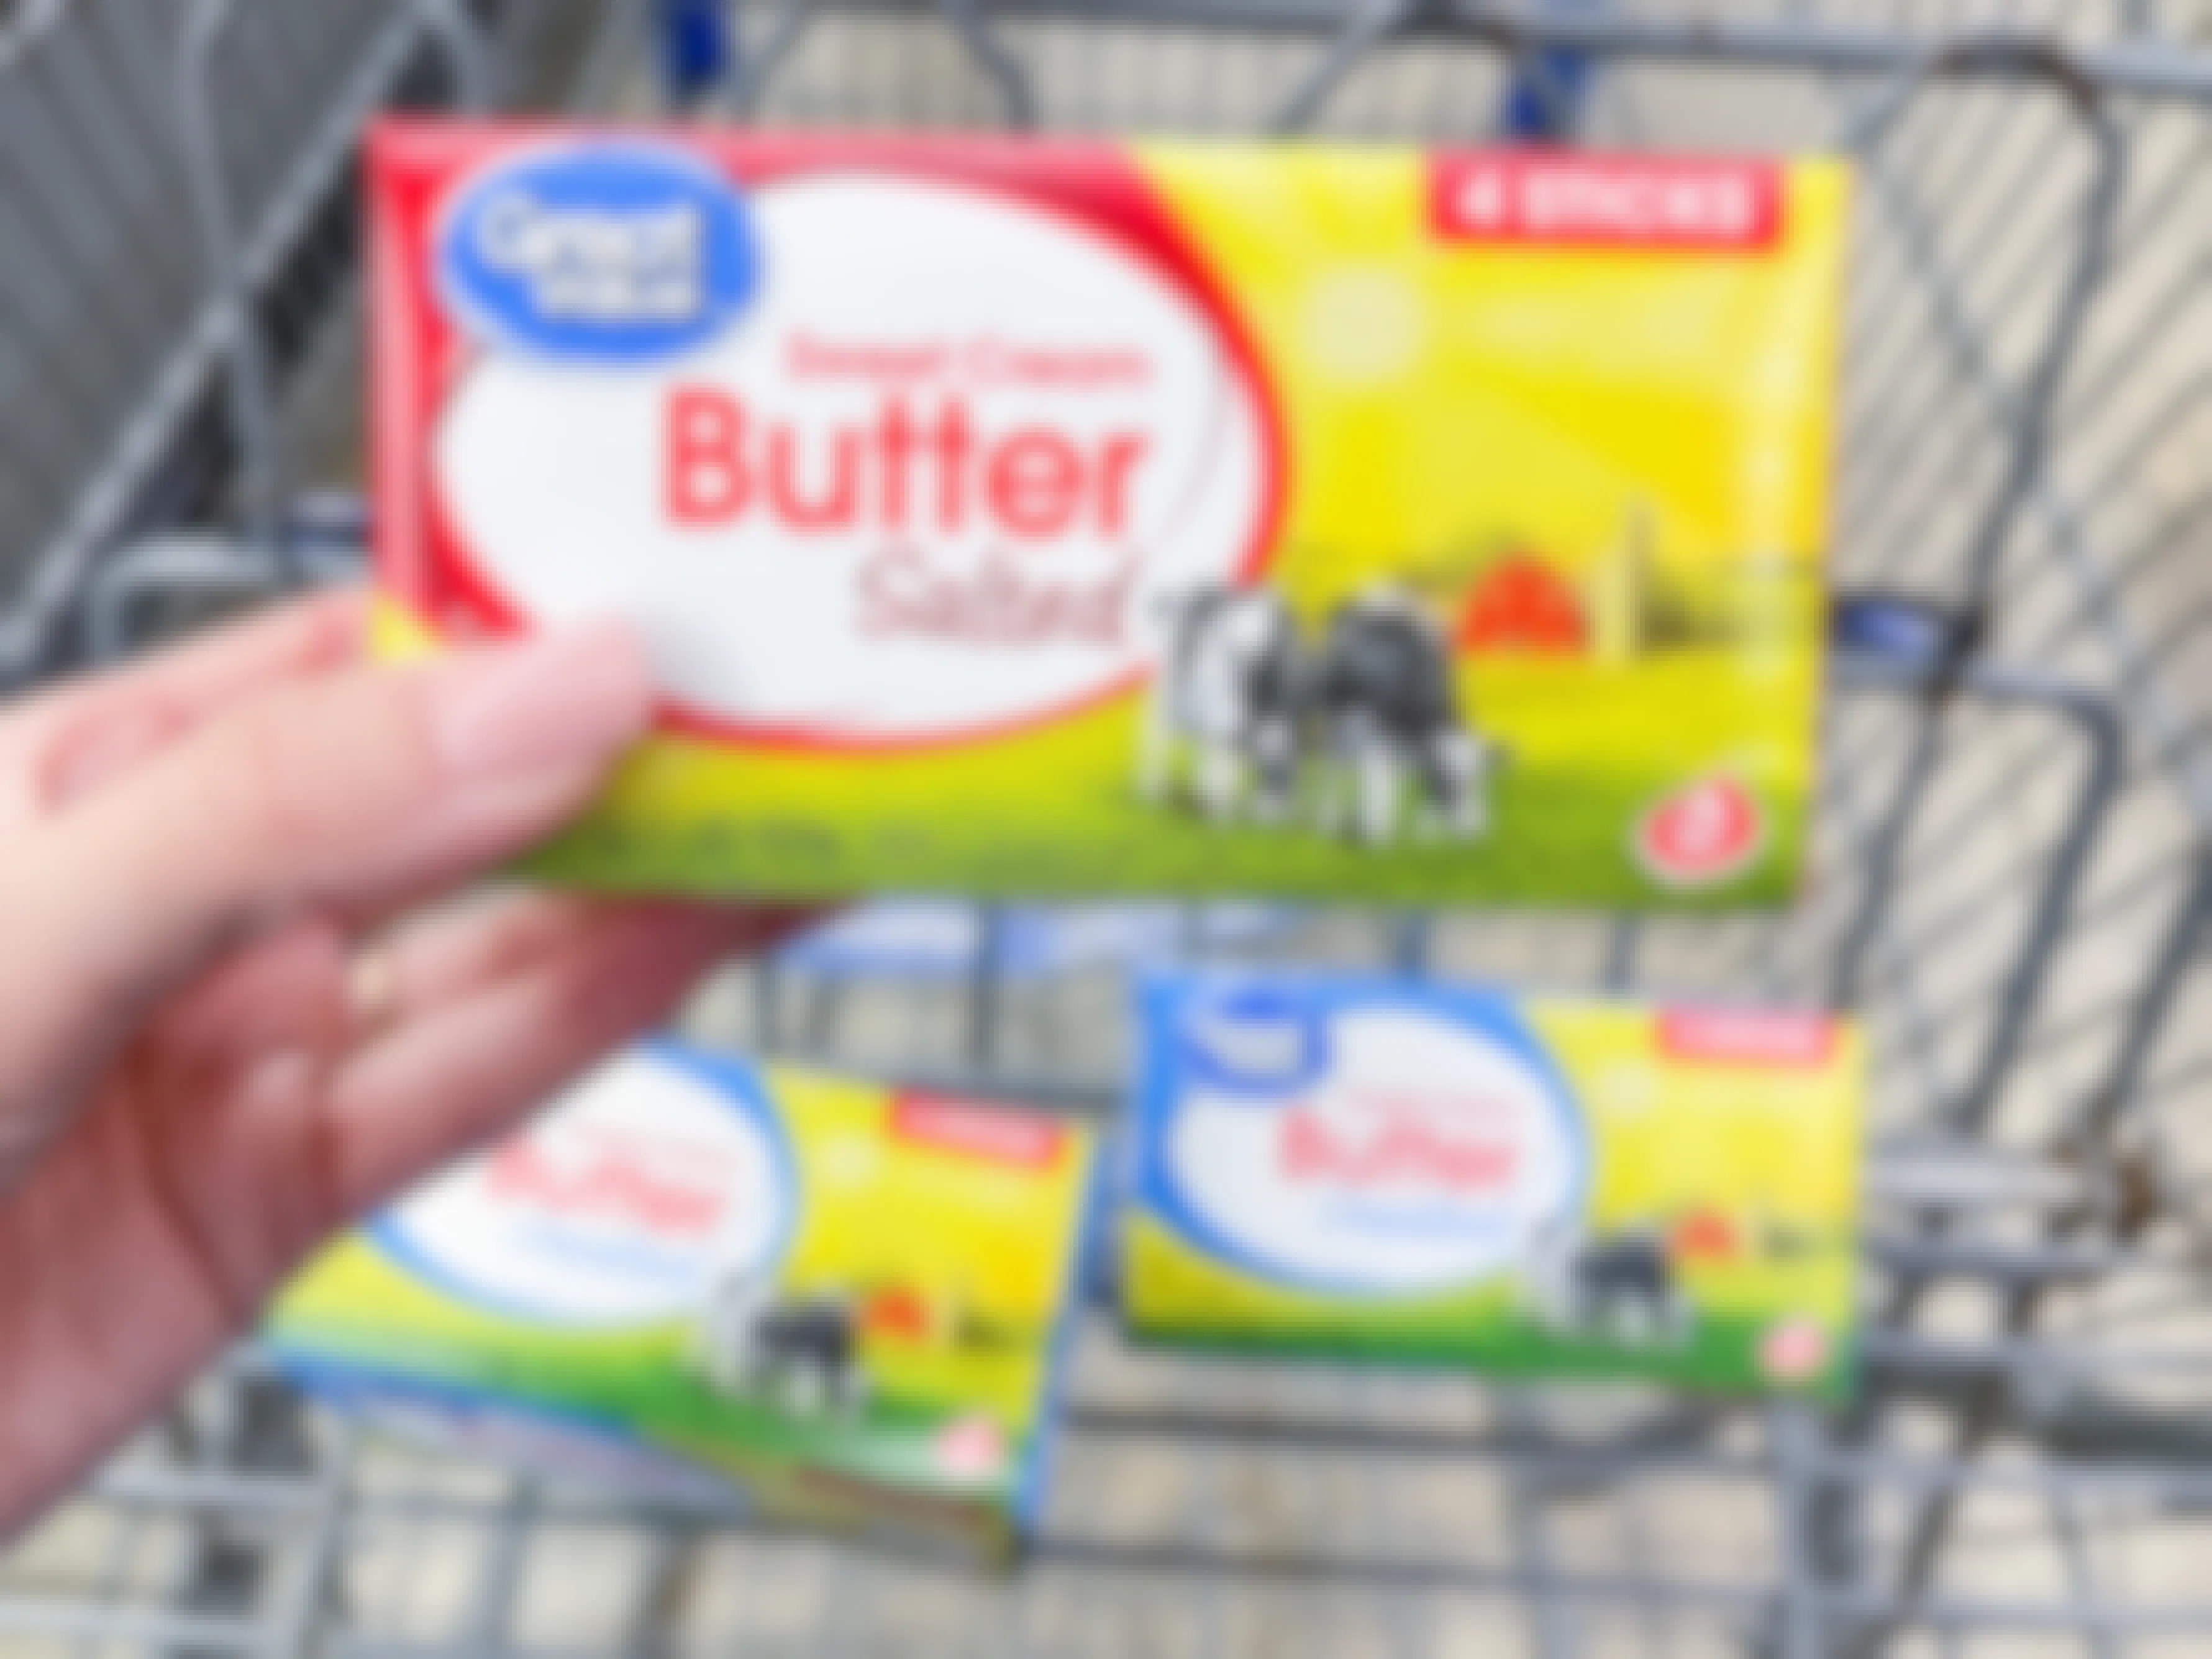 Someone holding some Great Value butter in front of more butter in a Walmart shopping cart